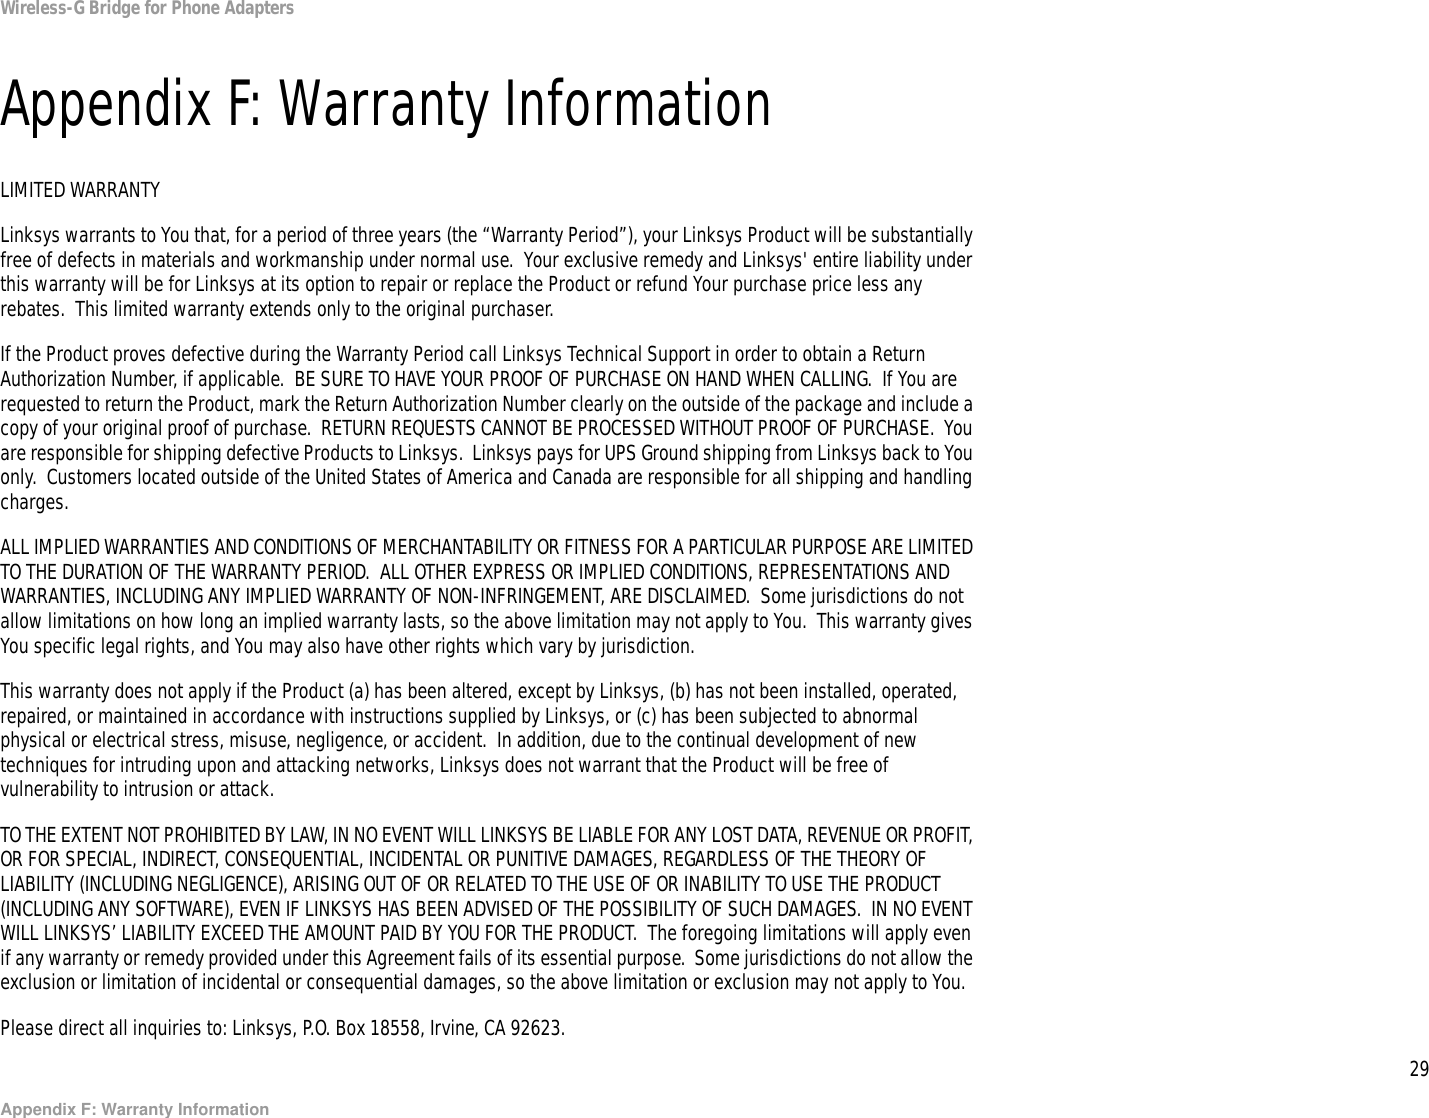 29Appendix F: Warranty InformationWireless-G Bridge for Phone AdaptersAppendix F: Warranty InformationLIMITED WARRANTYLinksys warrants to You that, for a period of three years (the “Warranty Period”), your Linksys Product will be substantially free of defects in materials and workmanship under normal use.  Your exclusive remedy and Linksys&apos; entire liability under this warranty will be for Linksys at its option to repair or replace the Product or refund Your purchase price less any rebates.  This limited warranty extends only to the original purchaser.  If the Product proves defective during the Warranty Period call Linksys Technical Support in order to obtain a Return Authorization Number, if applicable.  BE SURE TO HAVE YOUR PROOF OF PURCHASE ON HAND WHEN CALLING.  If You are requested to return the Product, mark the Return Authorization Number clearly on the outside of the package and include a copy of your original proof of purchase.  RETURN REQUESTS CANNOT BE PROCESSED WITHOUT PROOF OF PURCHASE.  You are responsible for shipping defective Products to Linksys.  Linksys pays for UPS Ground shipping from Linksys back to You only.  Customers located outside of the United States of America and Canada are responsible for all shipping and handling charges. ALL IMPLIED WARRANTIES AND CONDITIONS OF MERCHANTABILITY OR FITNESS FOR A PARTICULAR PURPOSE ARE LIMITED TO THE DURATION OF THE WARRANTY PERIOD.  ALL OTHER EXPRESS OR IMPLIED CONDITIONS, REPRESENTATIONS AND WARRANTIES, INCLUDING ANY IMPLIED WARRANTY OF NON-INFRINGEMENT, ARE DISCLAIMED.  Some jurisdictions do not allow limitations on how long an implied warranty lasts, so the above limitation may not apply to You.  This warranty gives You specific legal rights, and You may also have other rights which vary by jurisdiction.This warranty does not apply if the Product (a) has been altered, except by Linksys, (b) has not been installed, operated, repaired, or maintained in accordance with instructions supplied by Linksys, or (c) has been subjected to abnormal physical or electrical stress, misuse, negligence, or accident.  In addition, due to the continual development of new techniques for intruding upon and attacking networks, Linksys does not warrant that the Product will be free of vulnerability to intrusion or attack.TO THE EXTENT NOT PROHIBITED BY LAW, IN NO EVENT WILL LINKSYS BE LIABLE FOR ANY LOST DATA, REVENUE OR PROFIT, OR FOR SPECIAL, INDIRECT, CONSEQUENTIAL, INCIDENTAL OR PUNITIVE DAMAGES, REGARDLESS OF THE THEORY OF LIABILITY (INCLUDING NEGLIGENCE), ARISING OUT OF OR RELATED TO THE USE OF OR INABILITY TO USE THE PRODUCT (INCLUDING ANY SOFTWARE), EVEN IF LINKSYS HAS BEEN ADVISED OF THE POSSIBILITY OF SUCH DAMAGES.  IN NO EVENT WILL LINKSYS’ LIABILITY EXCEED THE AMOUNT PAID BY YOU FOR THE PRODUCT.  The foregoing limitations will apply even if any warranty or remedy provided under this Agreement fails of its essential purpose.  Some jurisdictions do not allow the exclusion or limitation of incidental or consequential damages, so the above limitation or exclusion may not apply to You.Please direct all inquiries to: Linksys, P.O. Box 18558, Irvine, CA 92623.